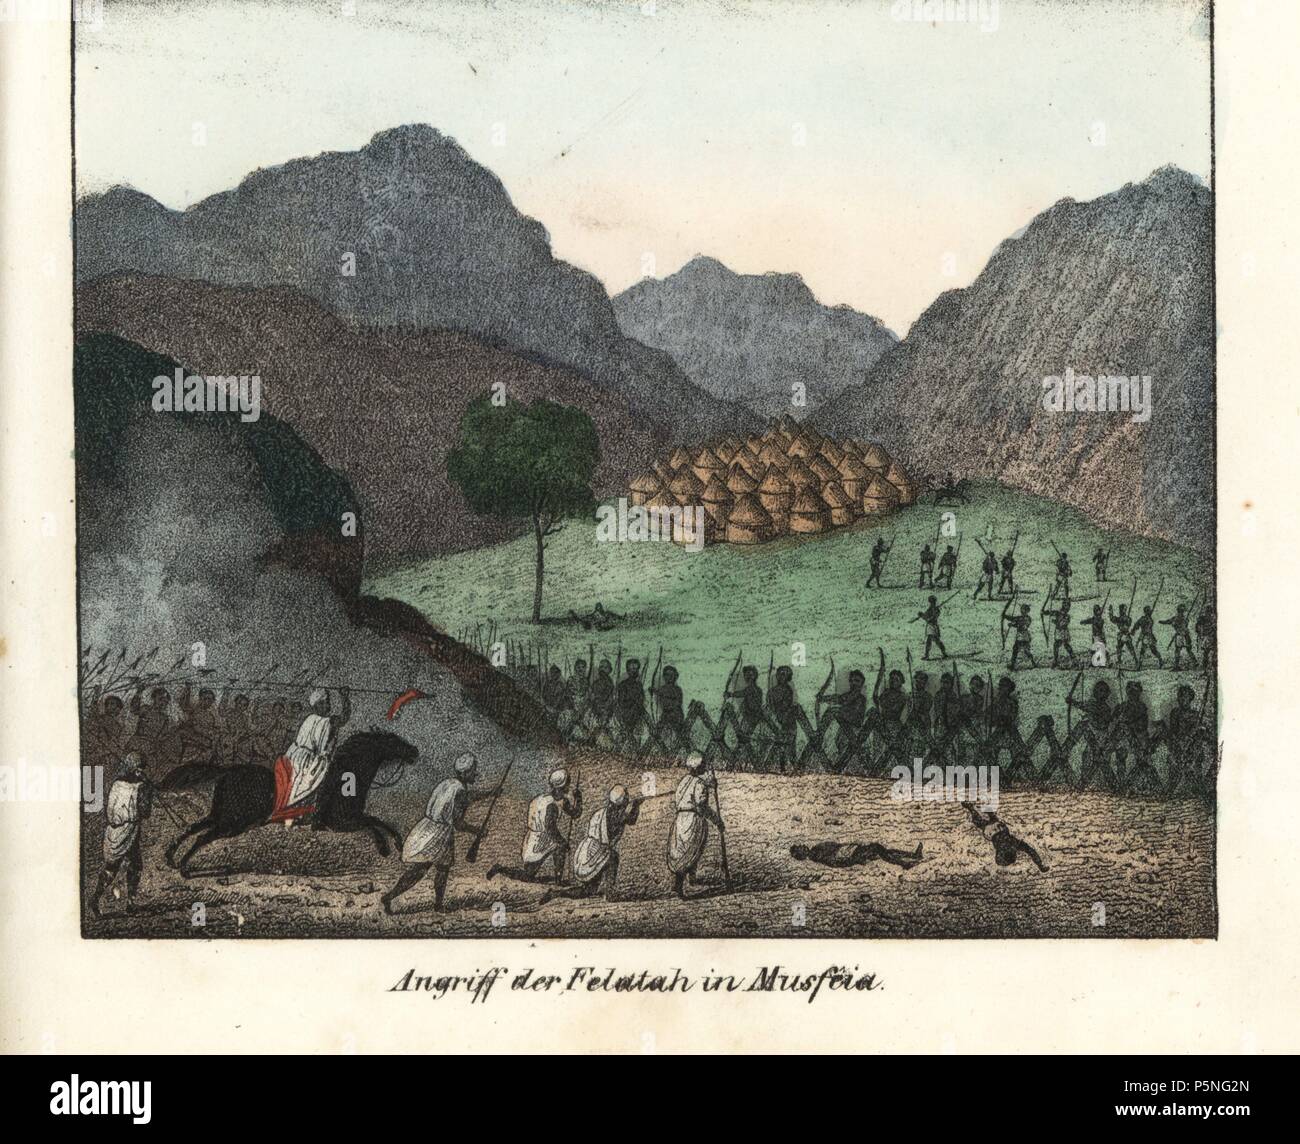 Felatah warriors defending their fortified mountain stronghold of Musfeia from an Arab attack. Handcoloured lithograph from Friedrich Wilhelm Goedsche's 'Vollstaendige Völkergallerie in getreuen Abbildungen' (Complete Gallery of Peoples in True Pictures), Meissen, circa 1835-1840. Goedsche (1785-1863) was a German writer, bookseller and publisher in Meissen. Many of the illustrations were adapted from Bertuch's 'Bilderbuch fur Kinder' and others. Stock Photo